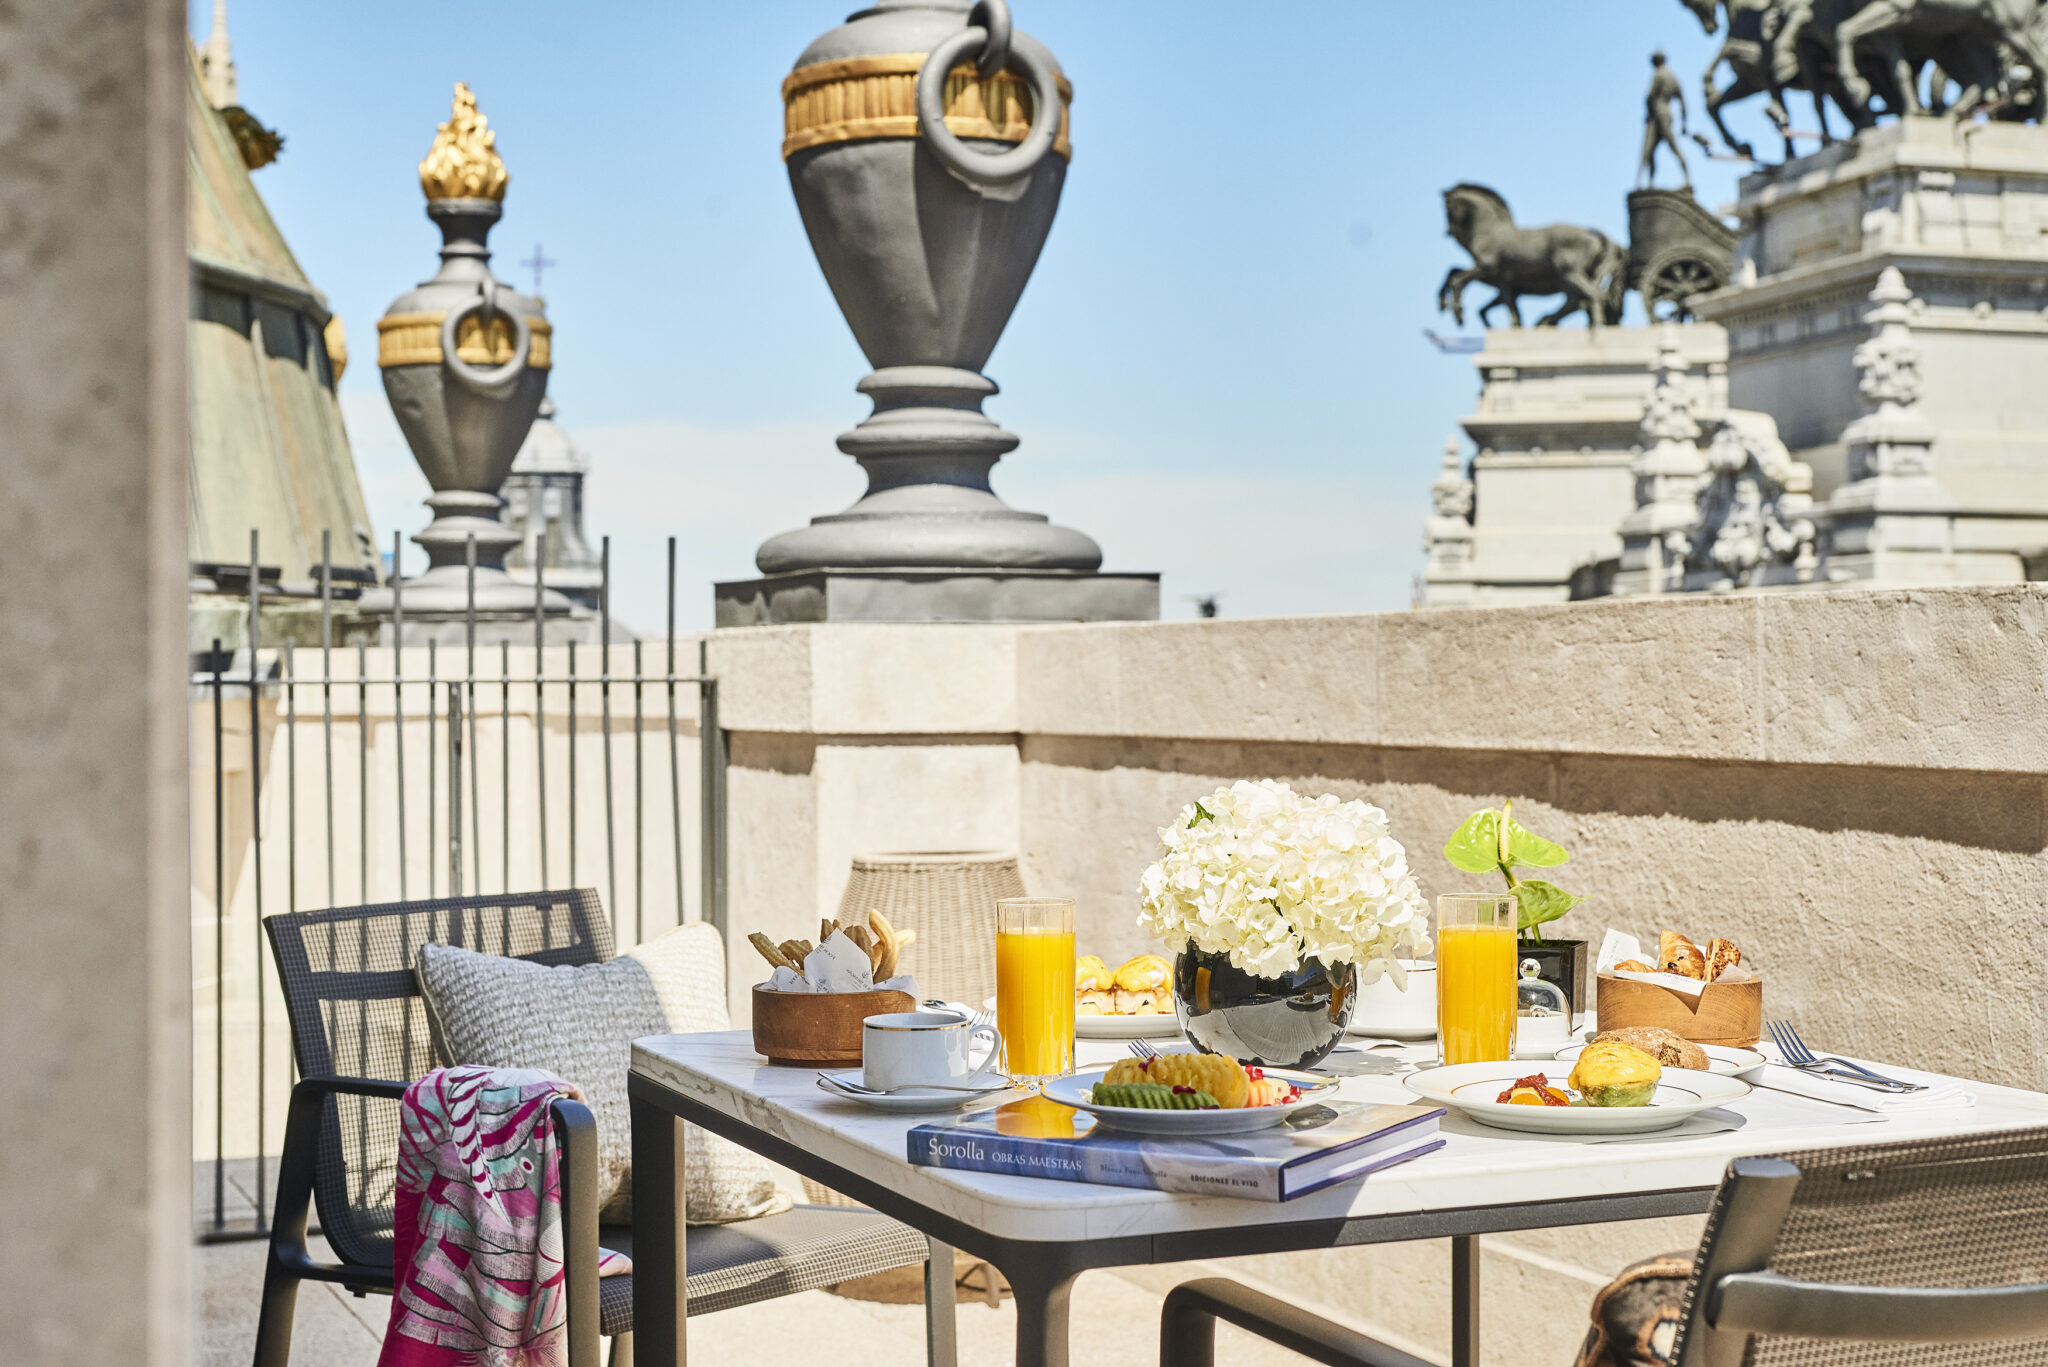 Four Seasons Hotel Madrid’s ‘Summer Getaway’ offer welcomes guests with 20% off on room rates